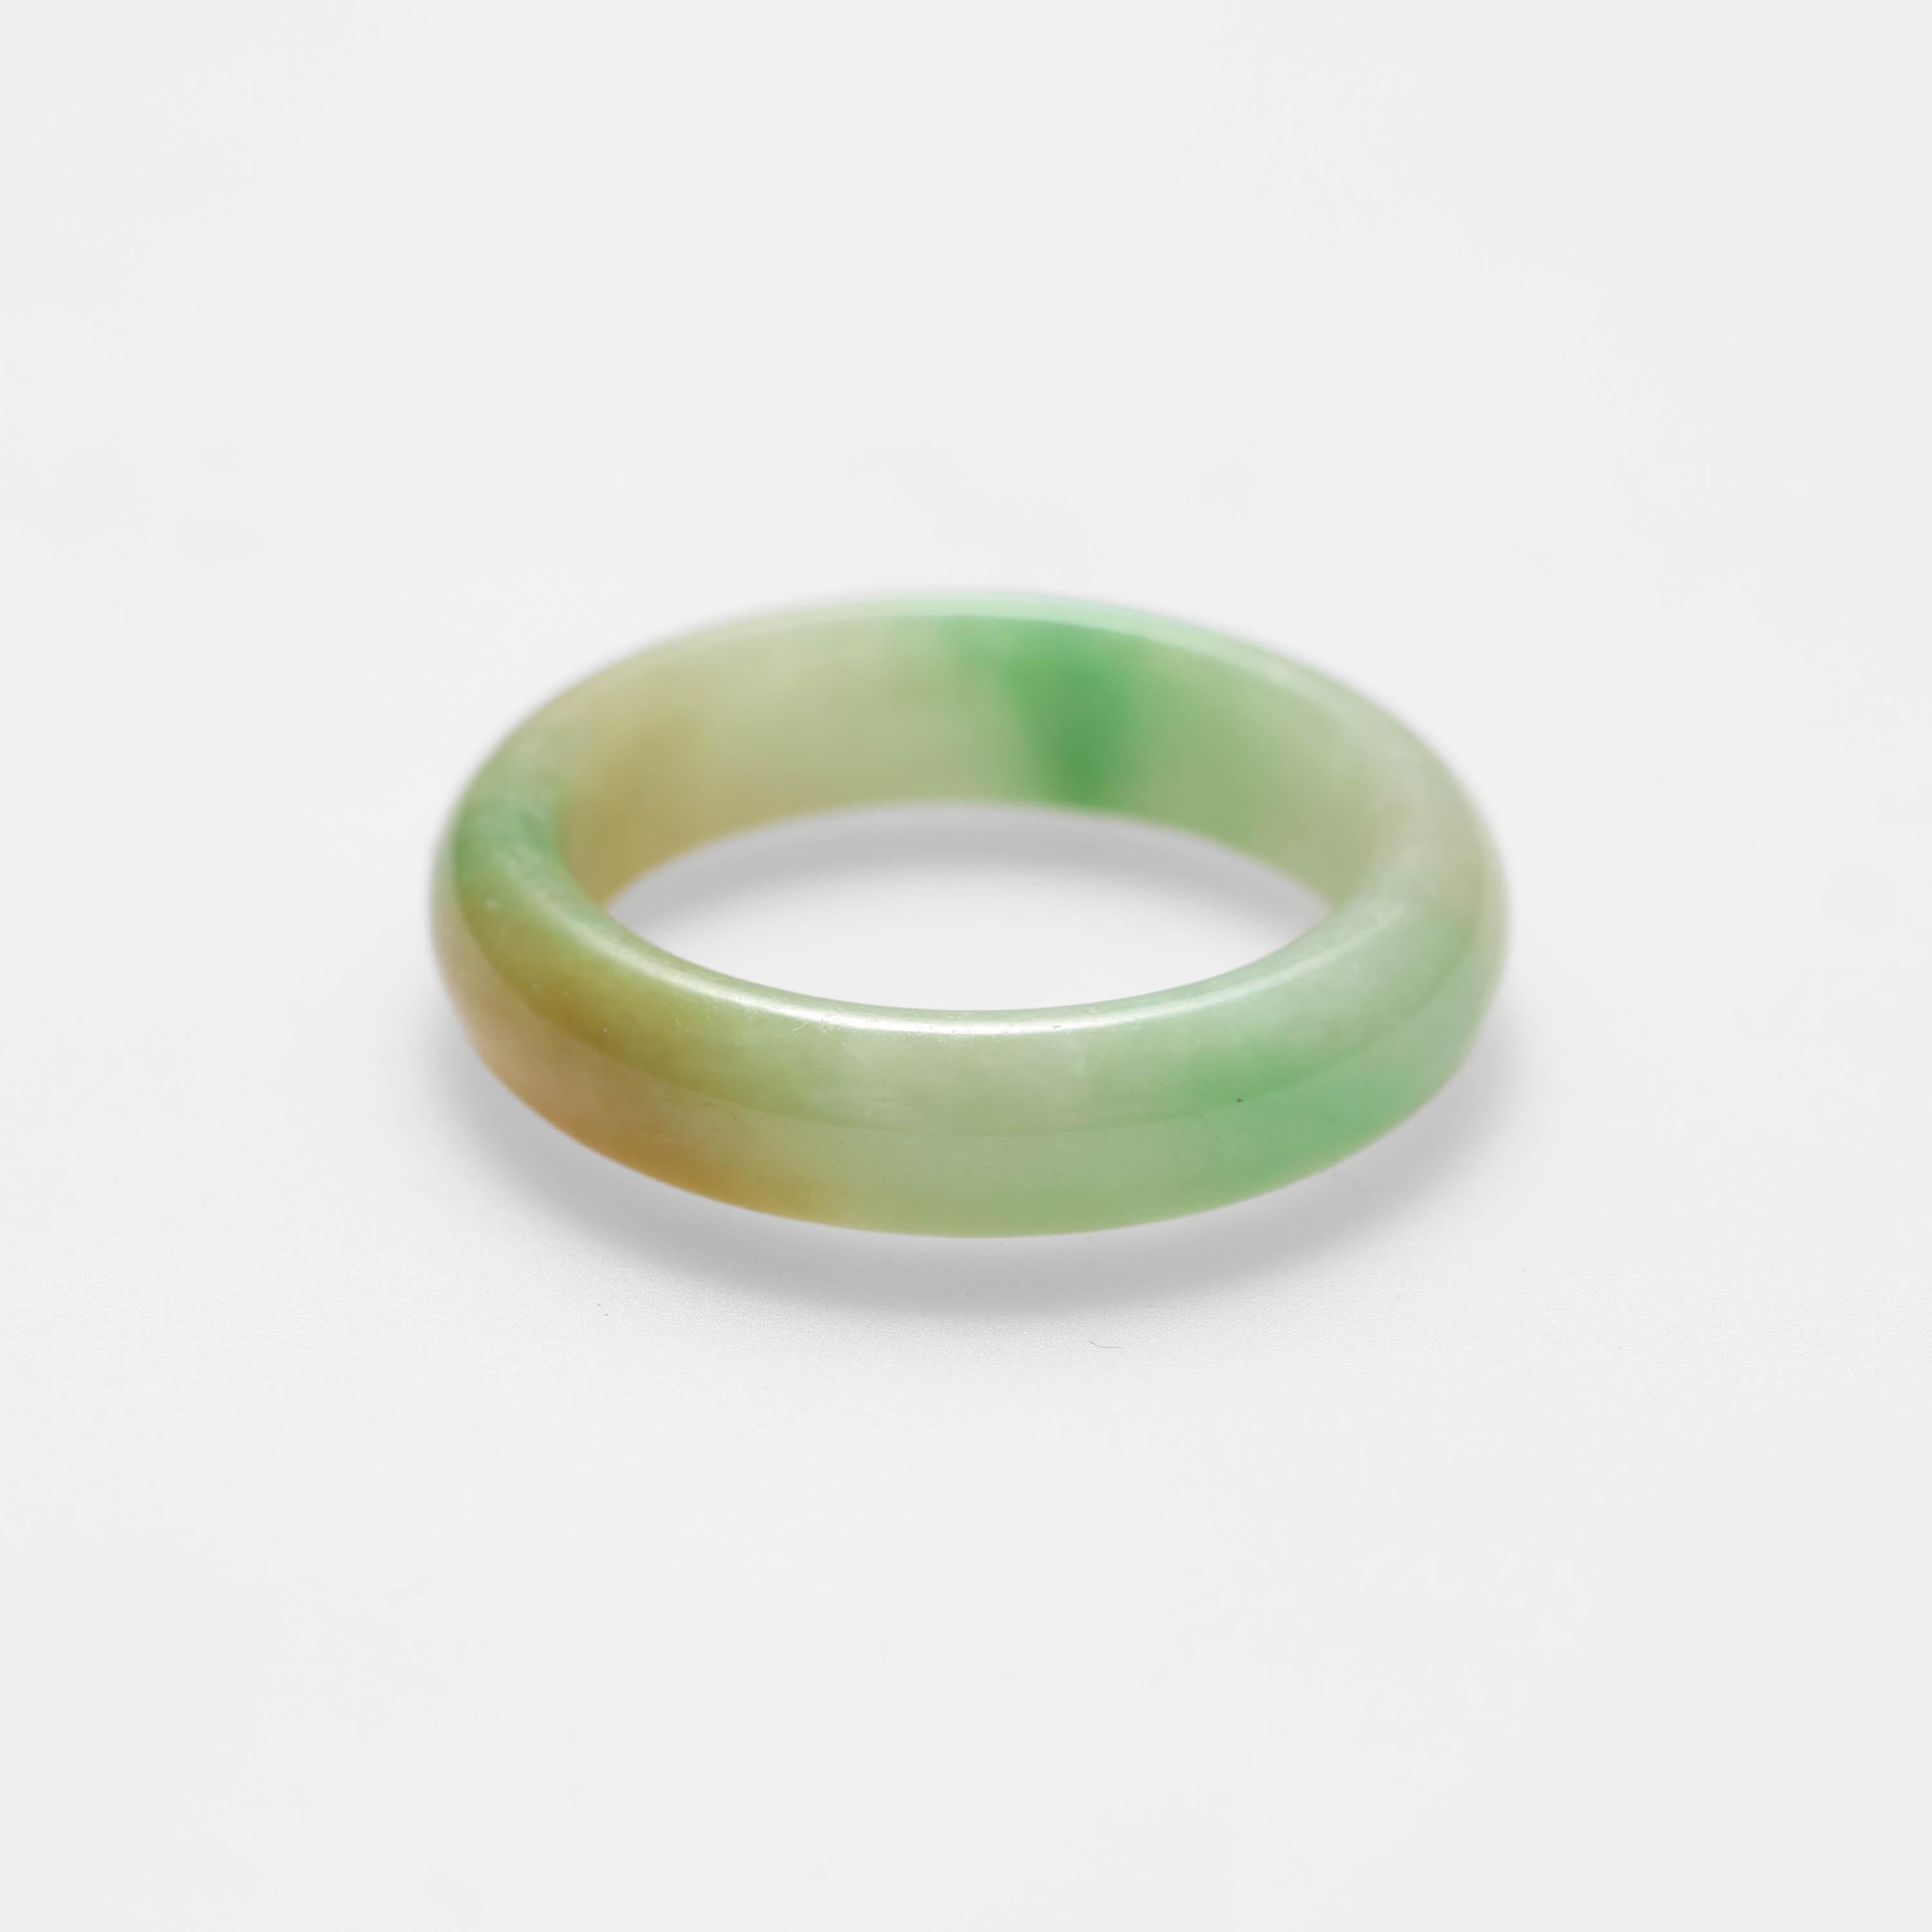 This ring was carved from a single piece of certified natural and untreated tricolor Burmese jadeite jade.  

This simple, elegant, and expertly carved jade band ring is highly translucent and features apple green, pale green and yellow jadeite